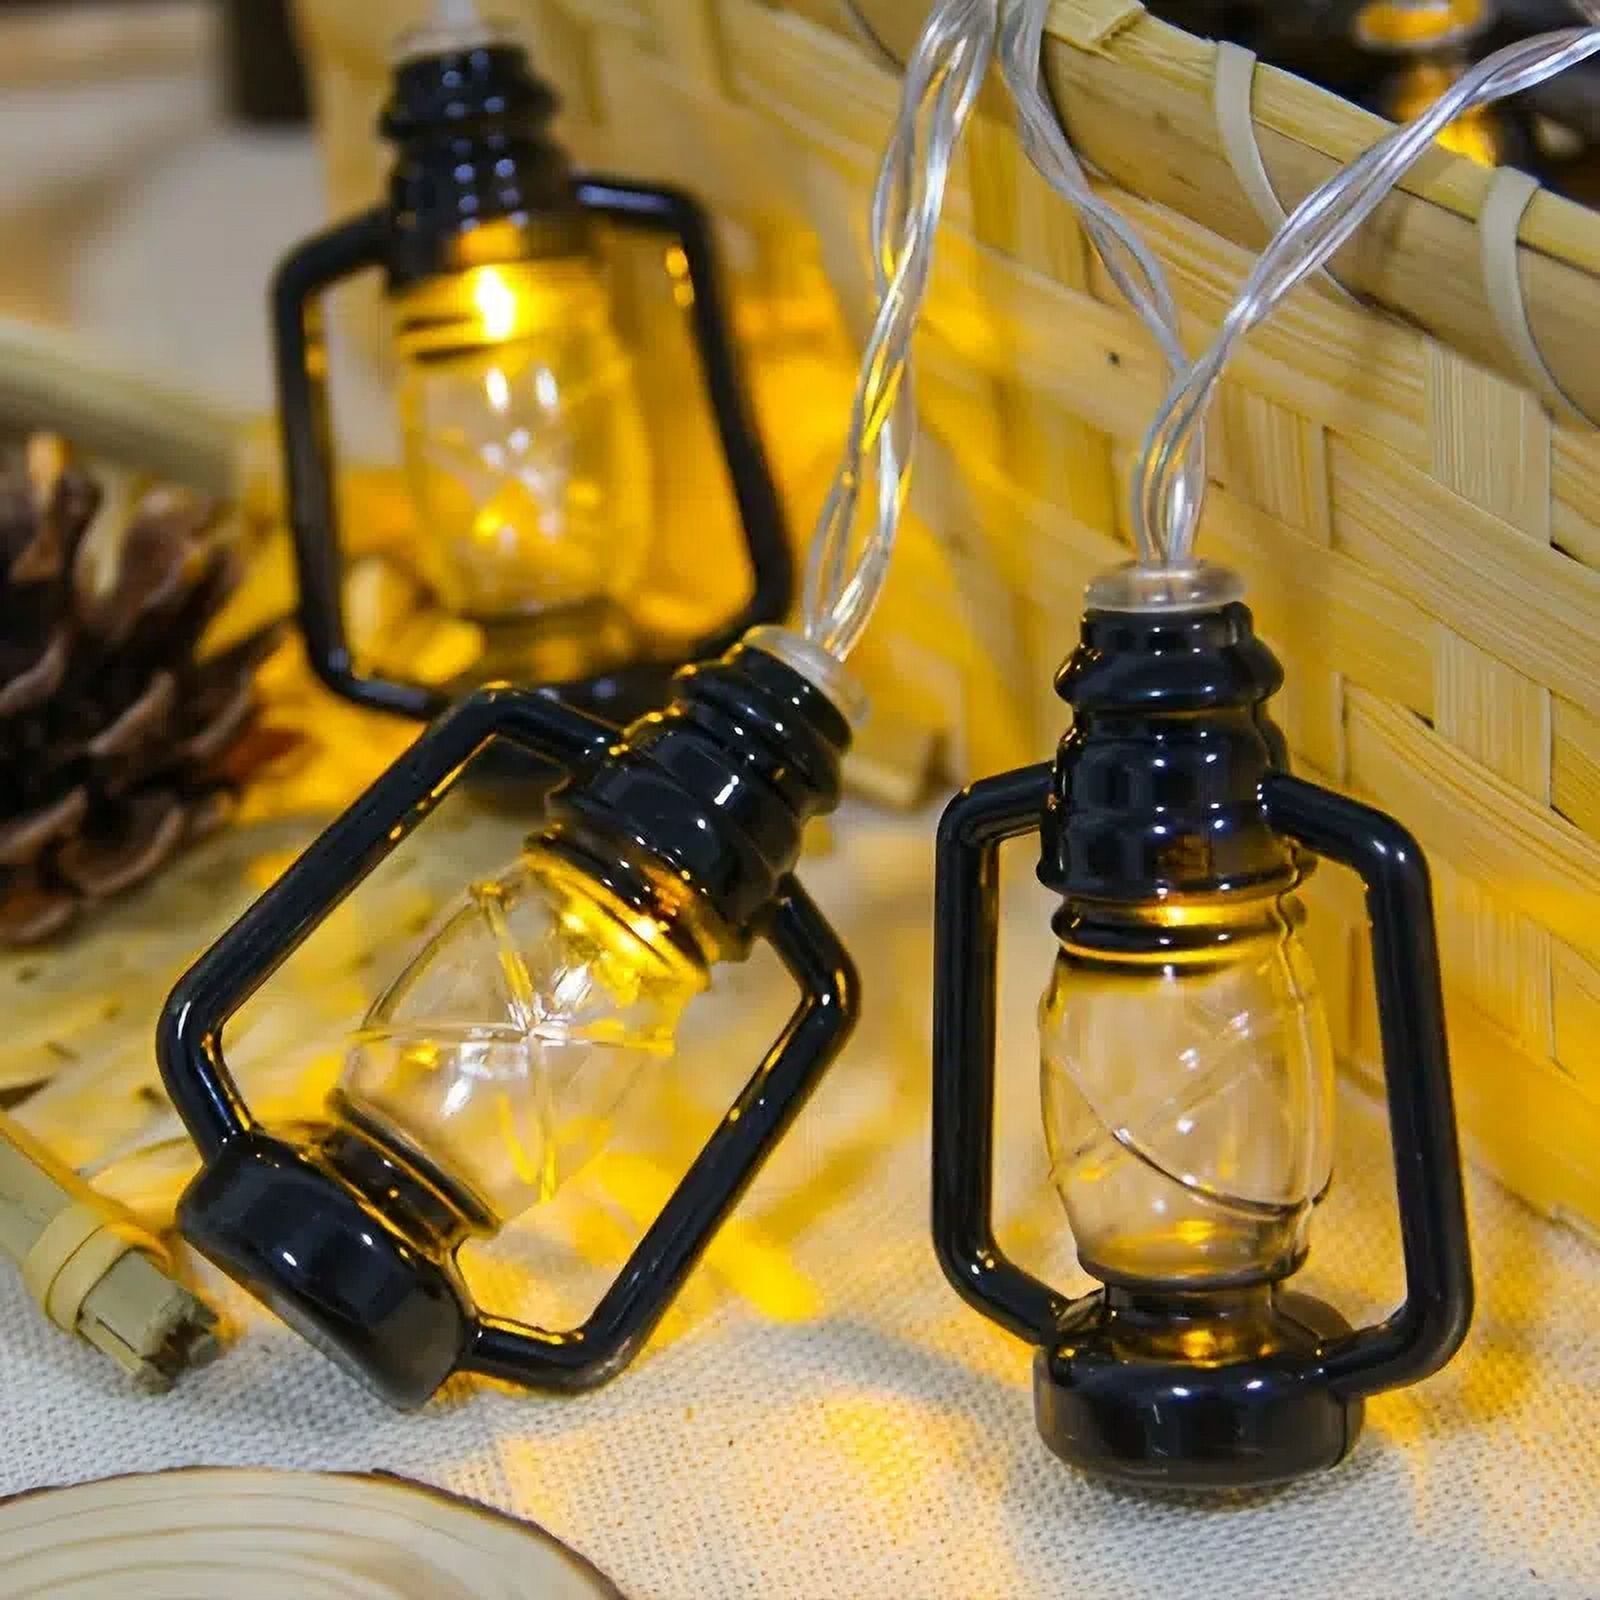 Retro Oil Lamp Electric Flameless Candle Lamps LED Novelty